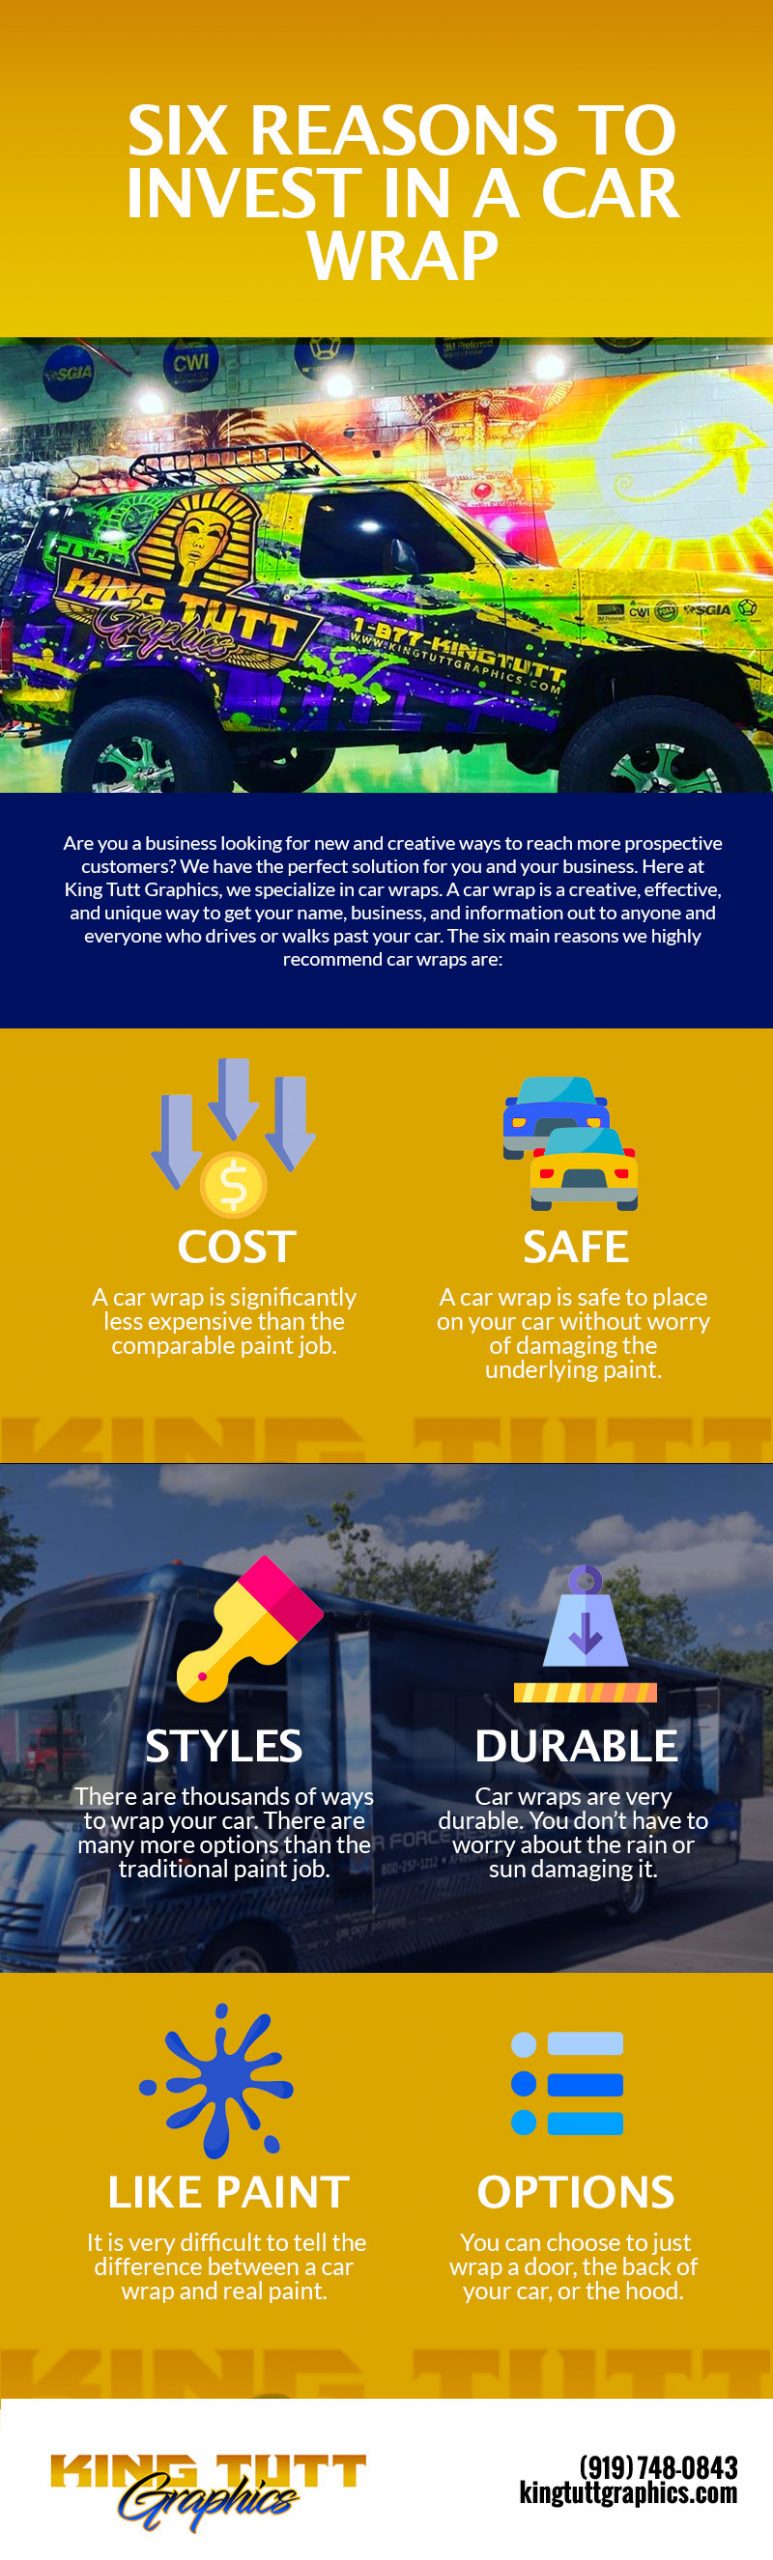 Six Reasons to Invest in a Car Wrap [infographic]